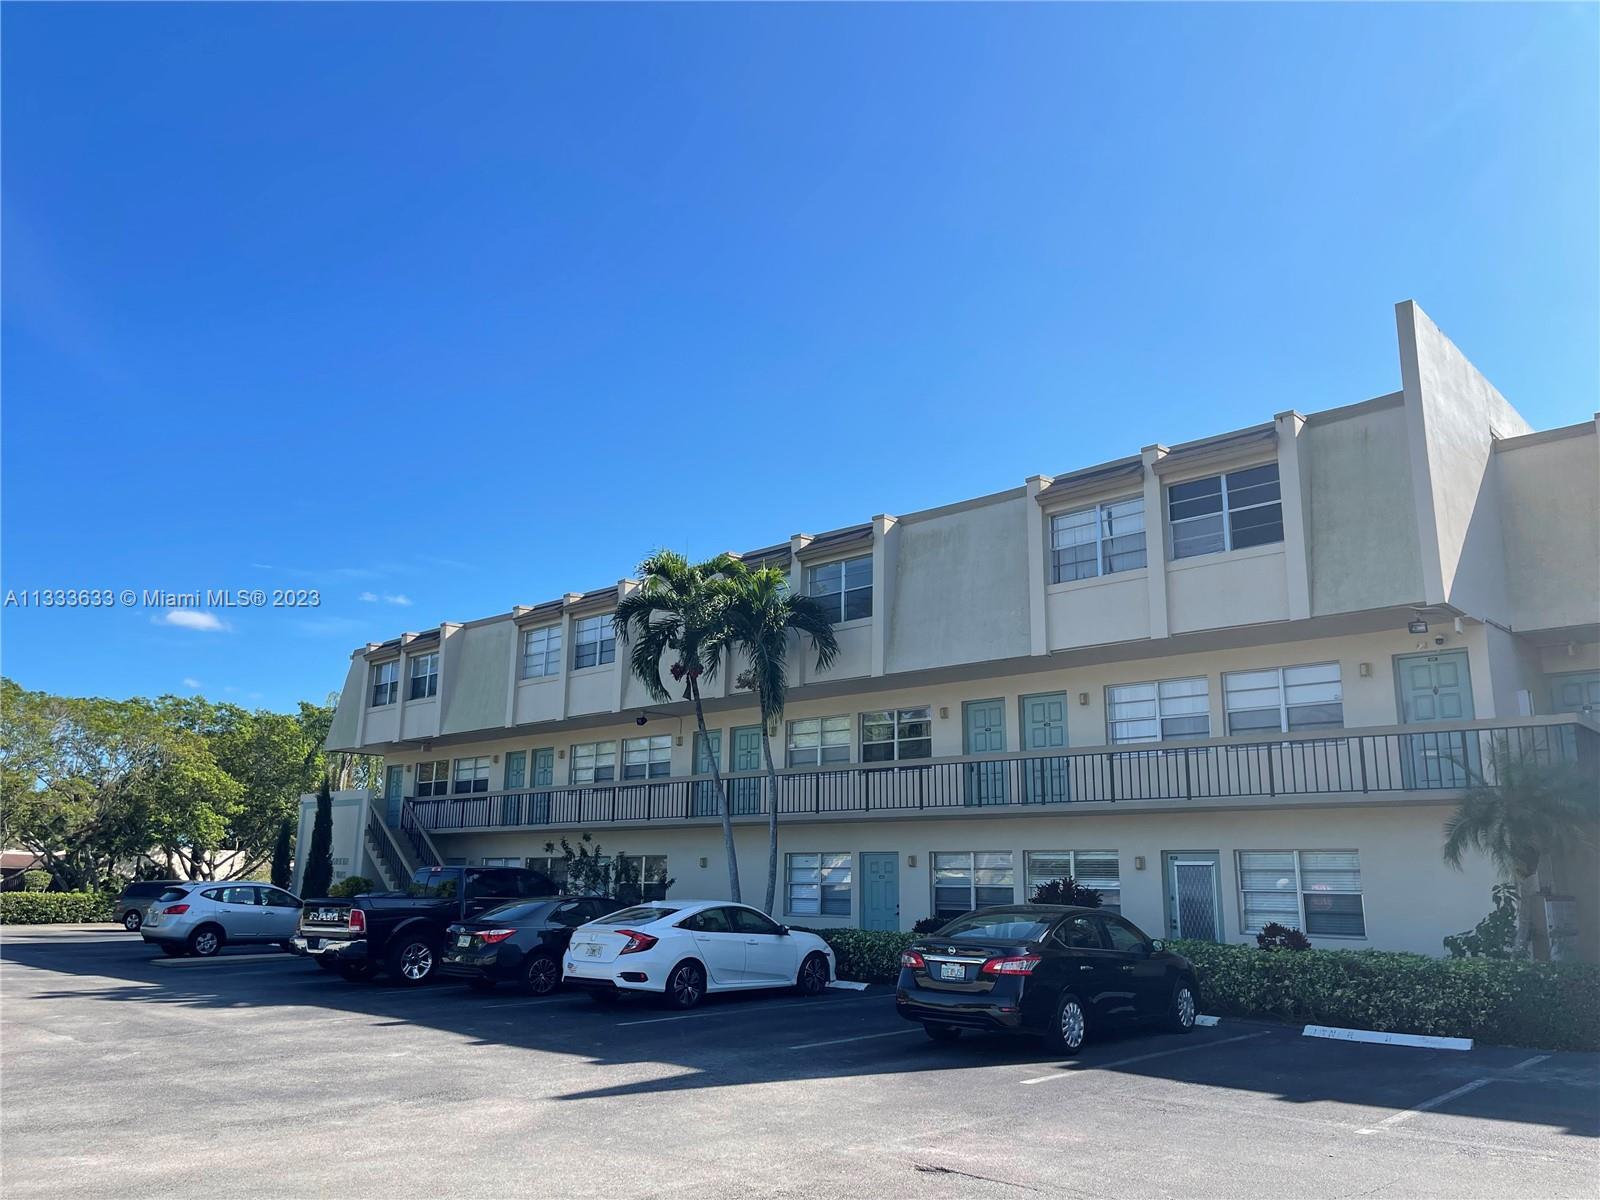 Call/Text Listing Agent for Appointment. Town House Style Condo BEST VALUE IN BOCA RATON Spacious 13